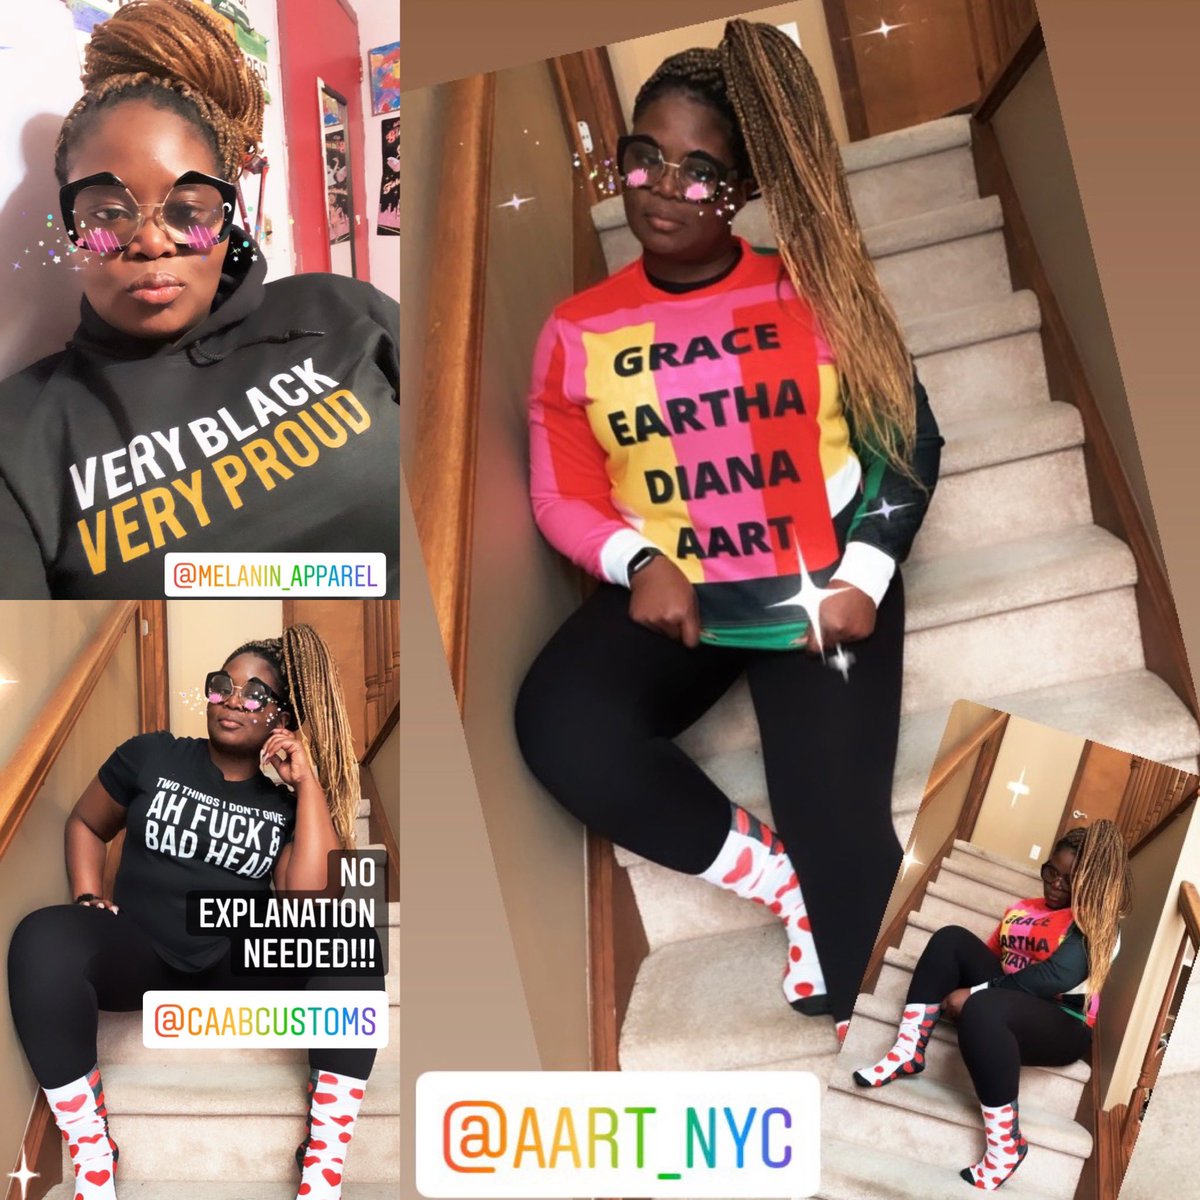 When I say I’m gonna do something,
I do it! Support Black Businesses

@aart_nyc @melanin_apparel @caabcustoms 

#supportblackbusiness #blackownedbusiness #graphichoodies #graphicsweatshirt #funsocks #unapologeticallyblack